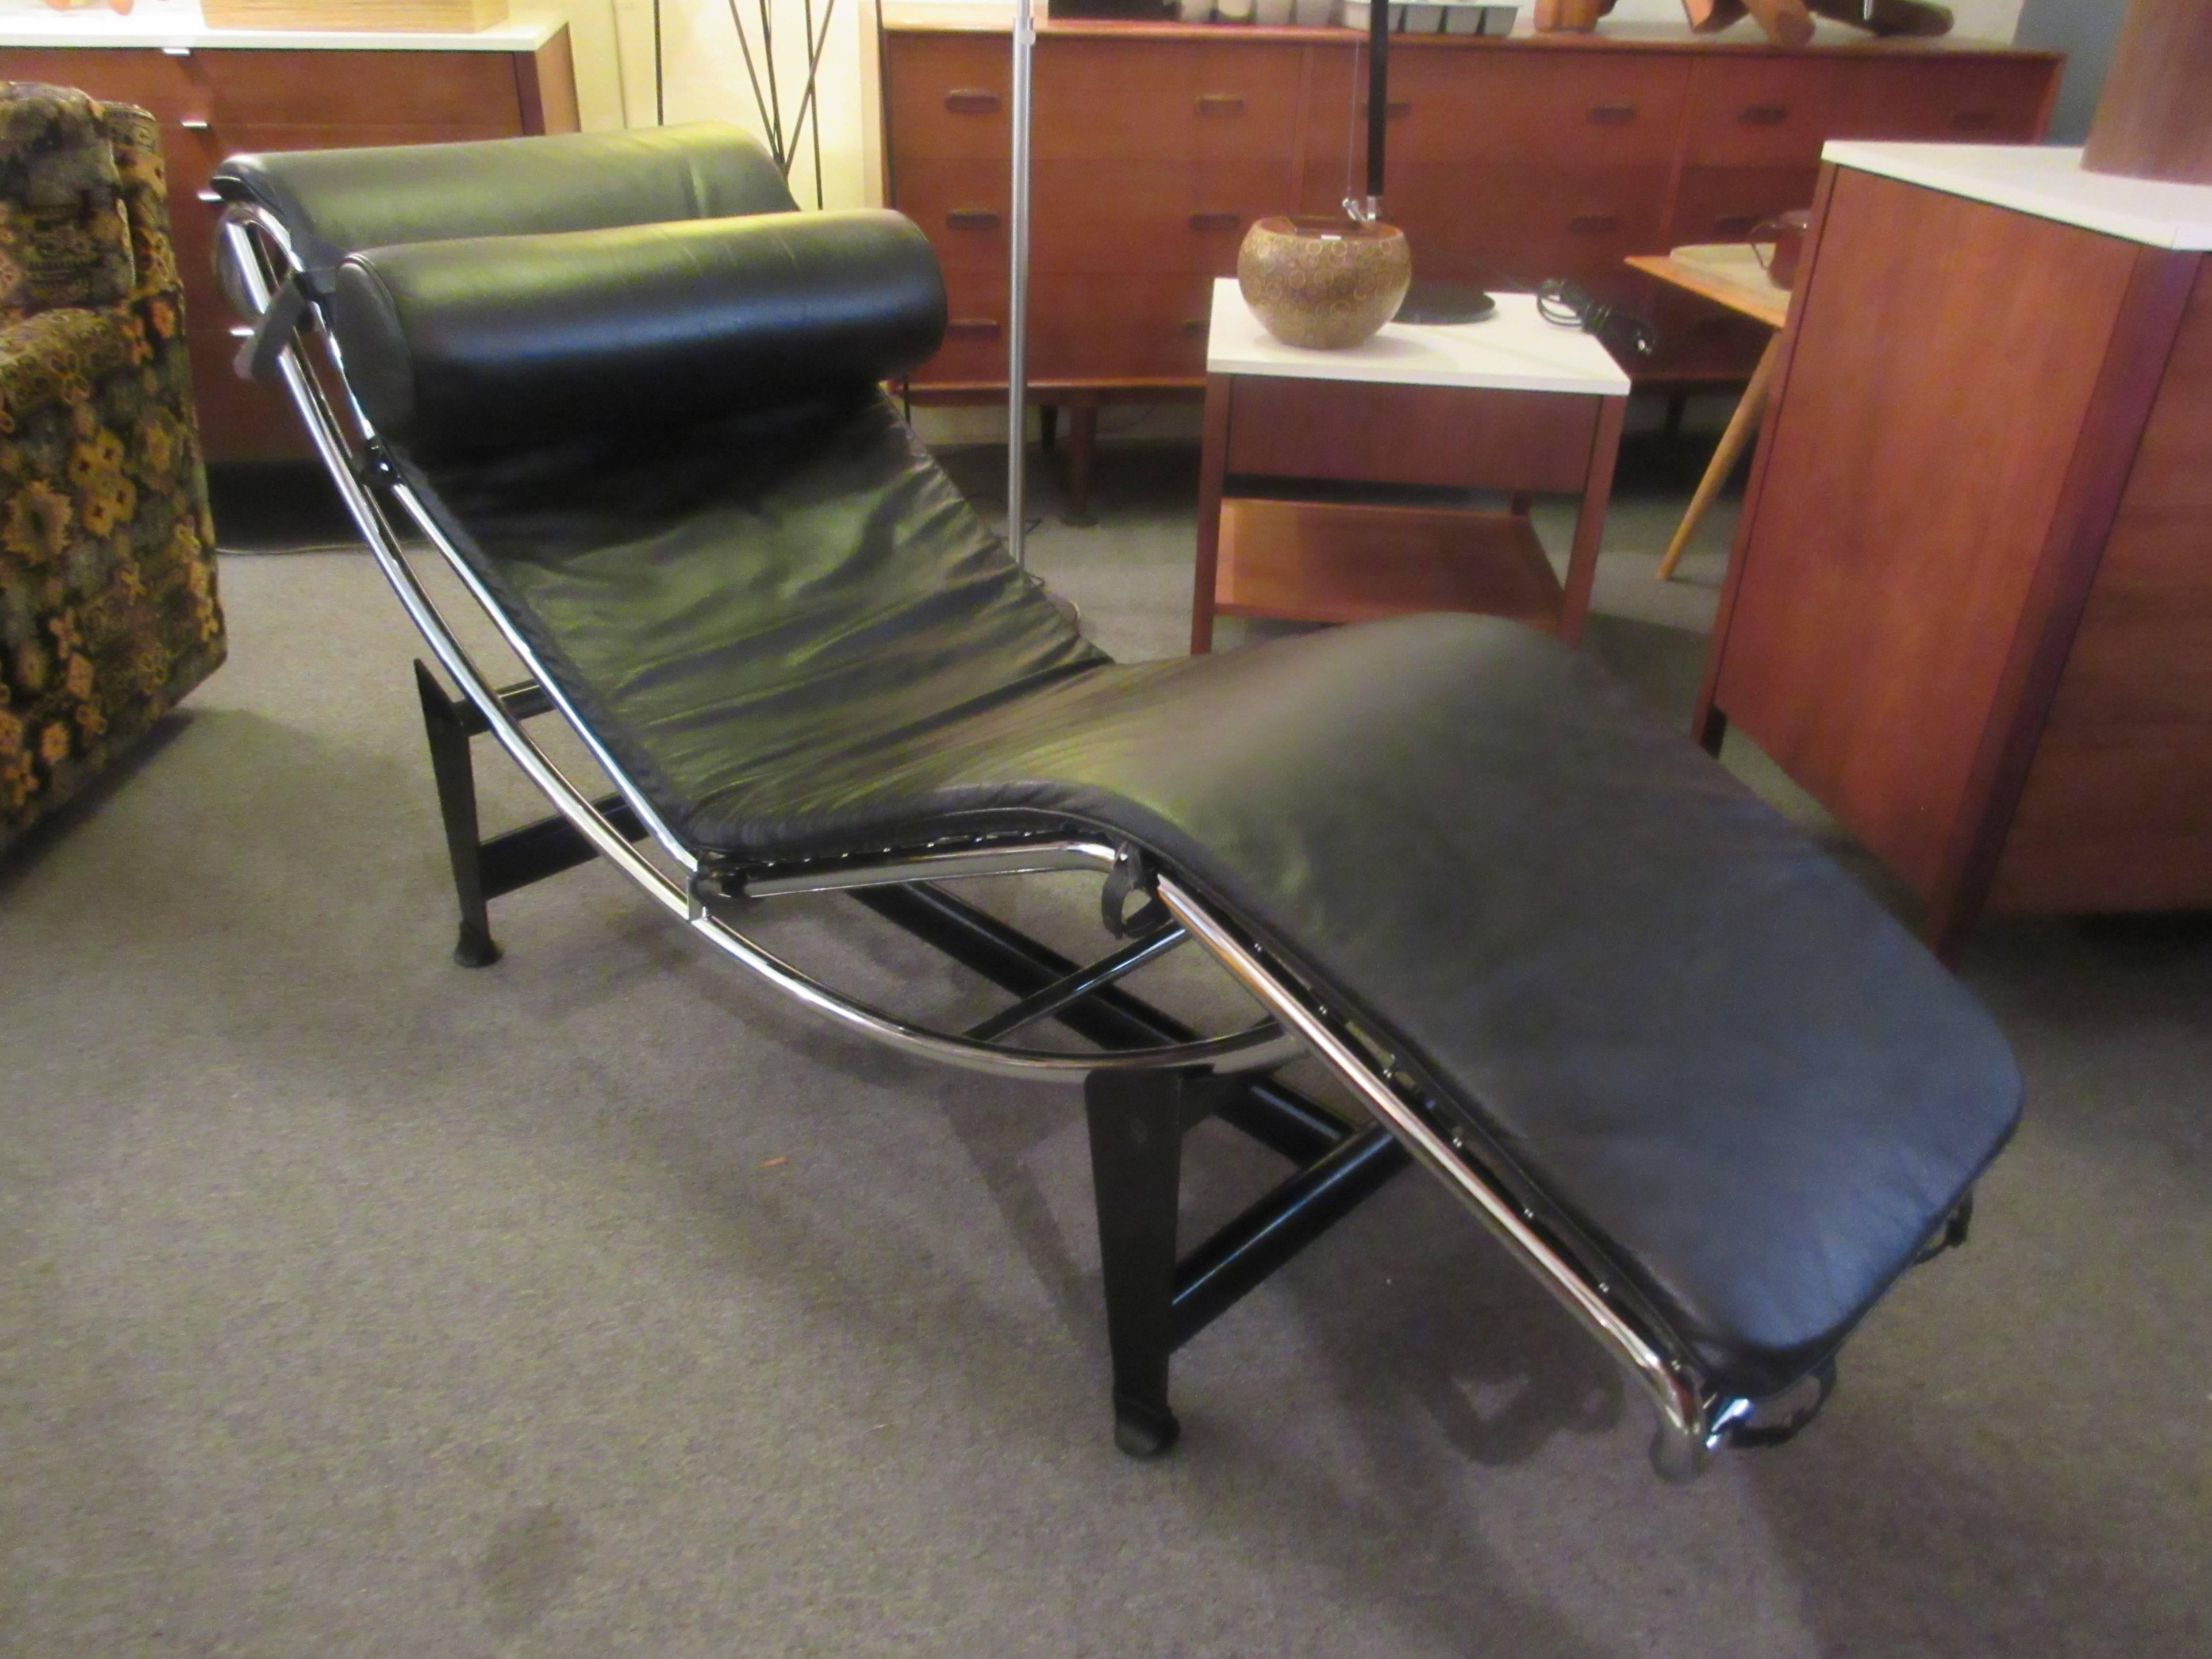 Pristine chaise longue. Bought in the 1980s and never used. No scuffs or scrapes and all rubber, leather and steel strapping perfect. Fully adjustable on it's rubber and steel cradle.